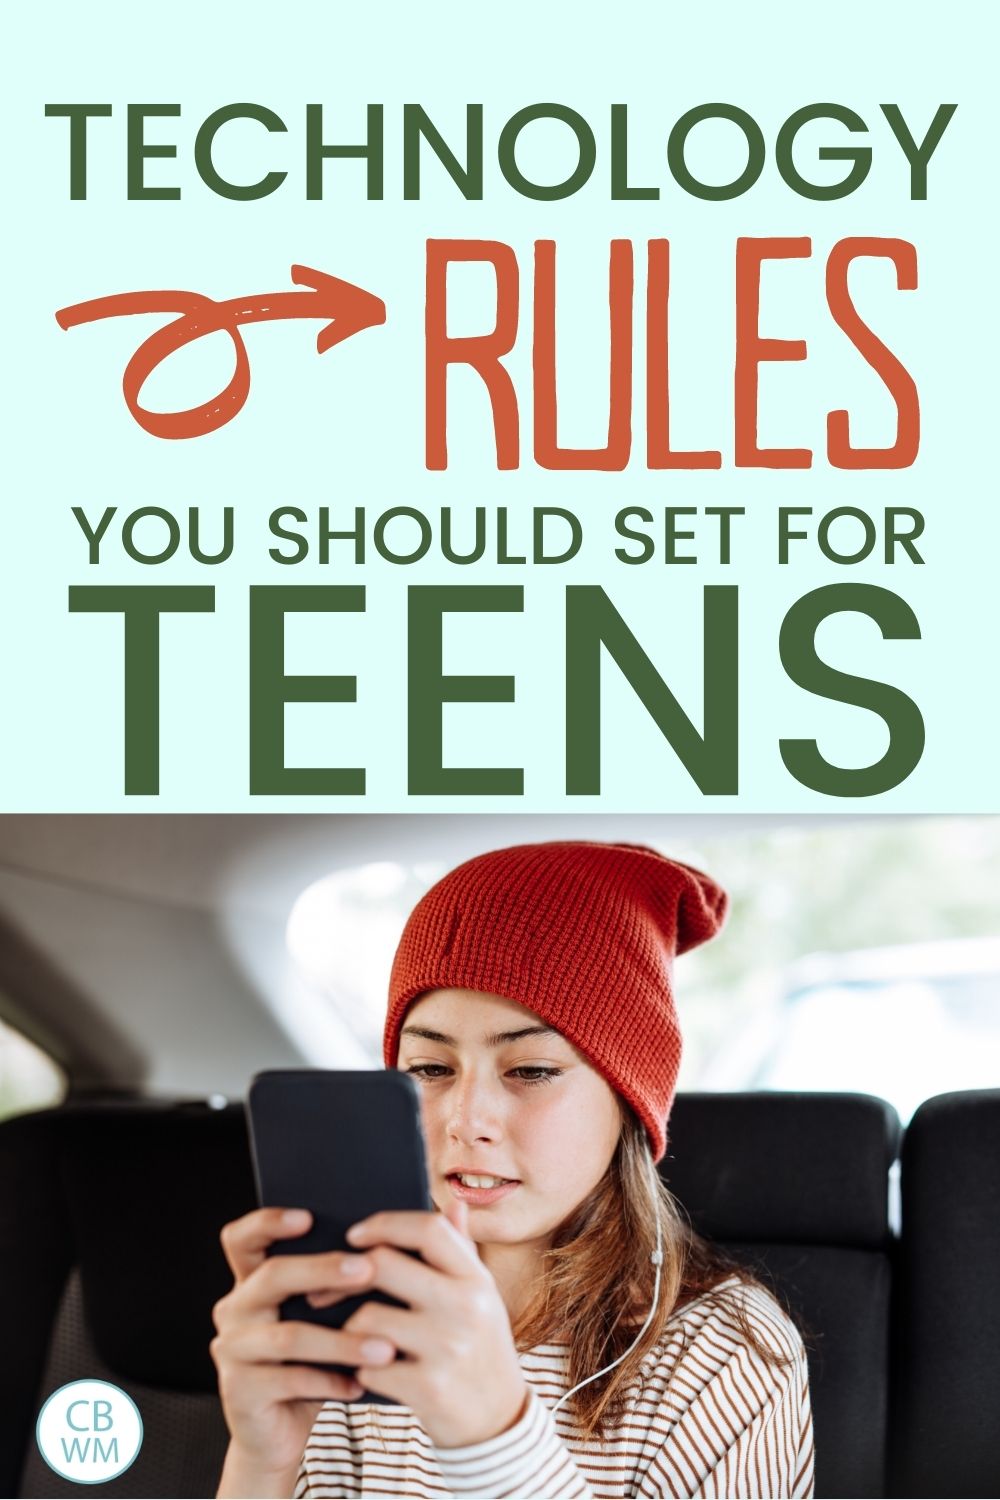 Technology rules for teens